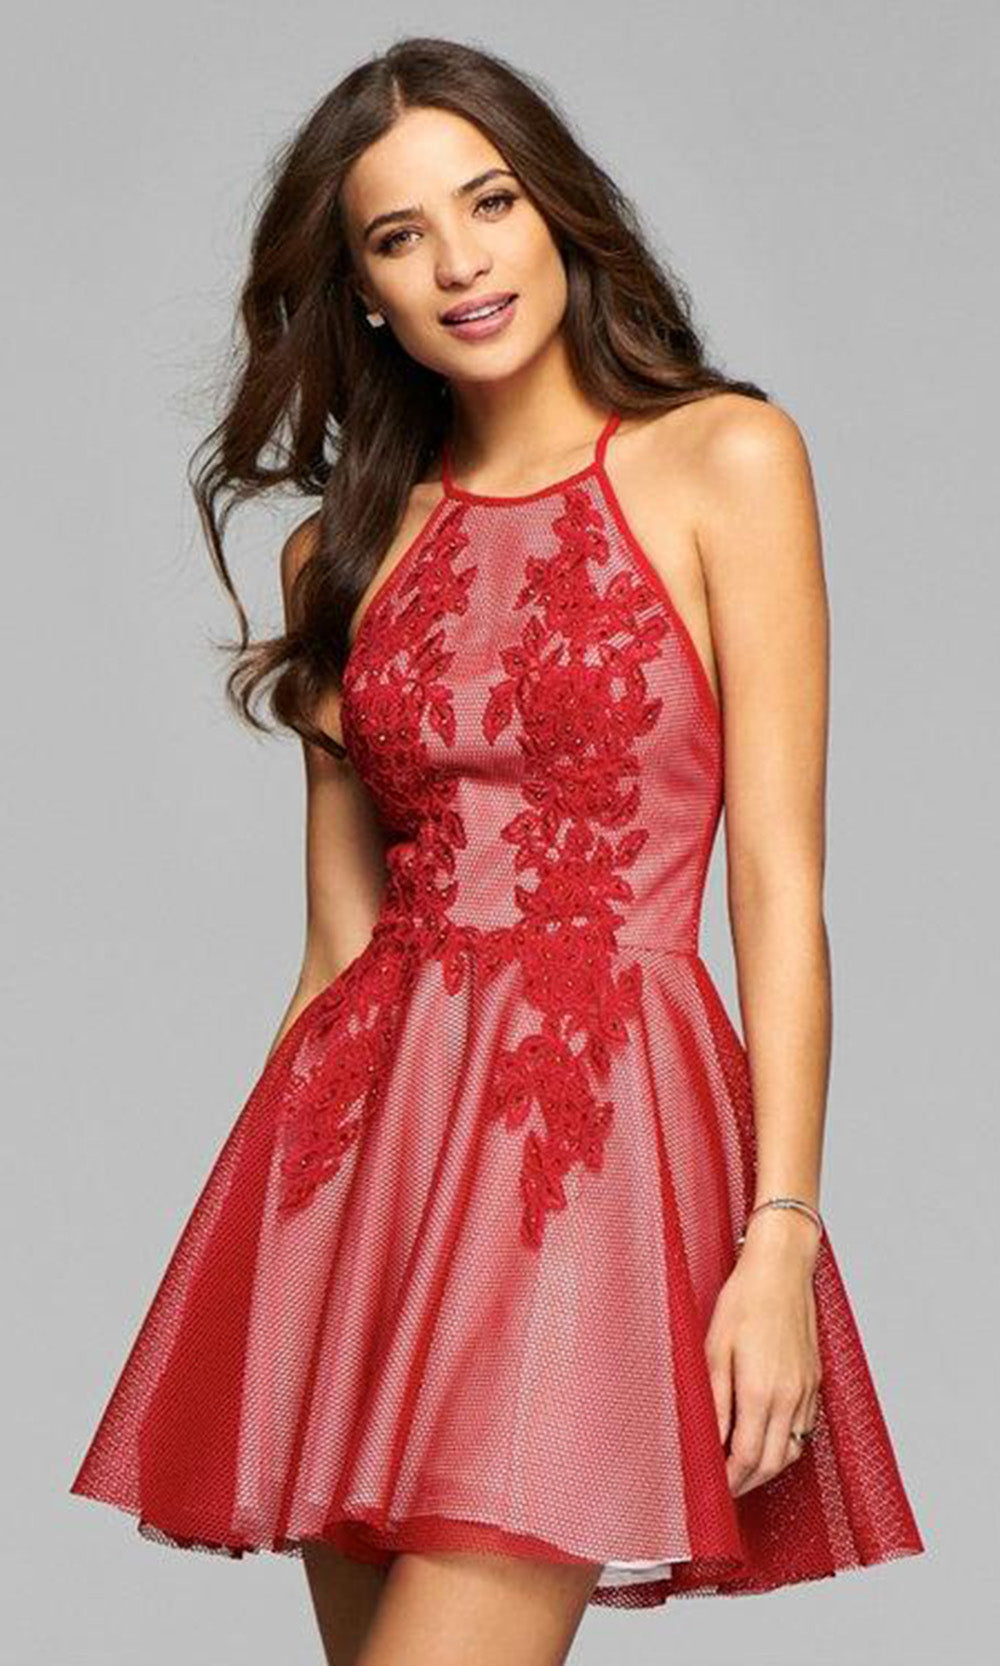 Faviana 7874 Mesh Halter Cocktail Dress With Lace Applique - 1 pc Ruby in Size 6 Available CCSALE 6 / Ruby